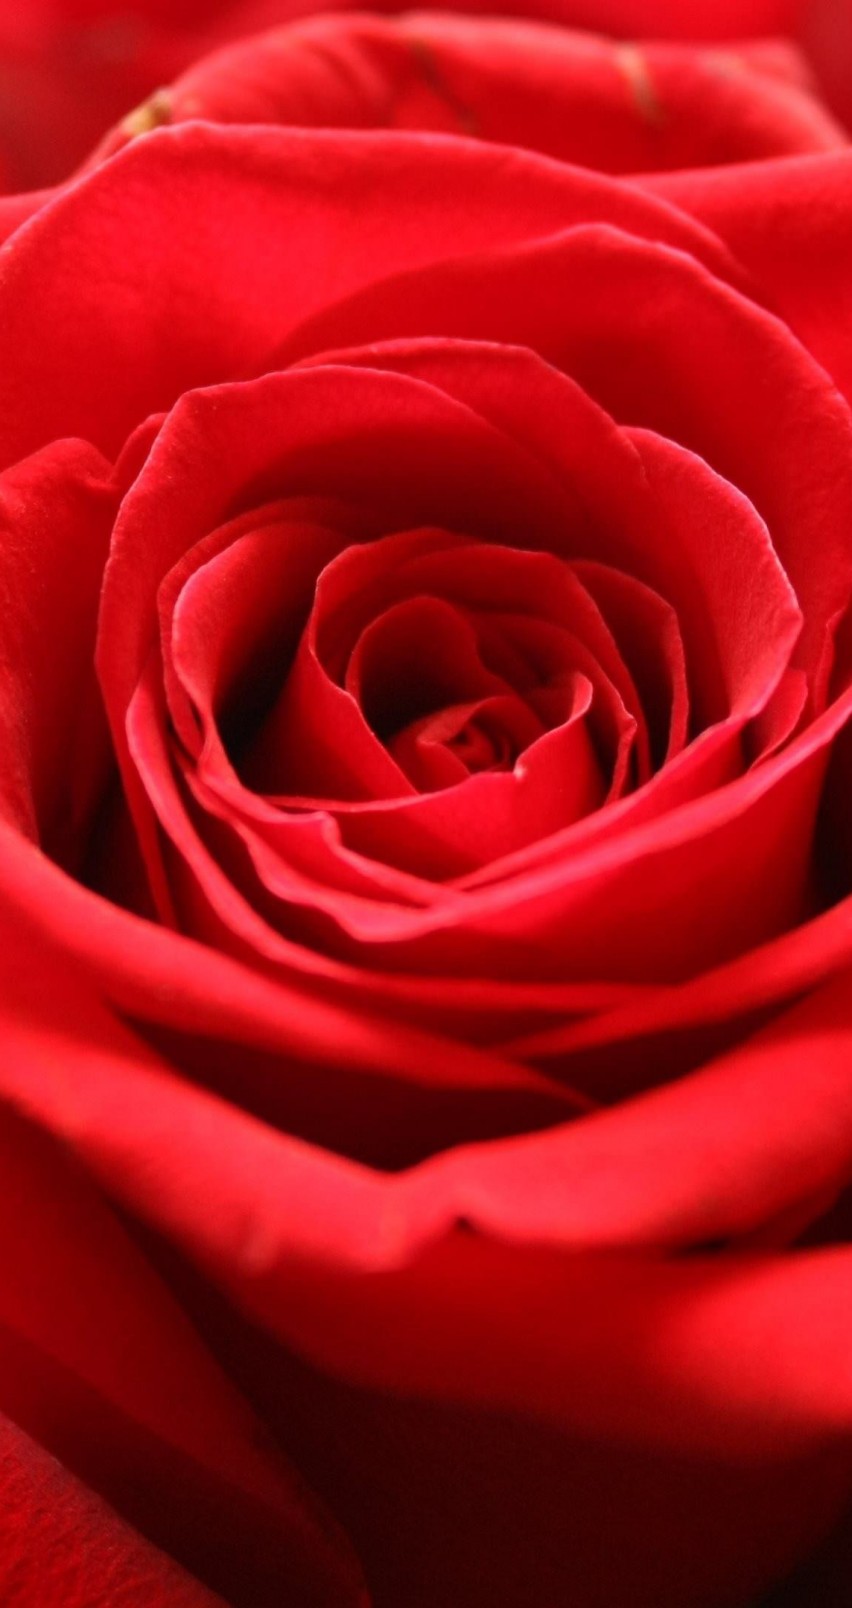 Red Rose Wallpaper for Apple iPhone 6 / 6s